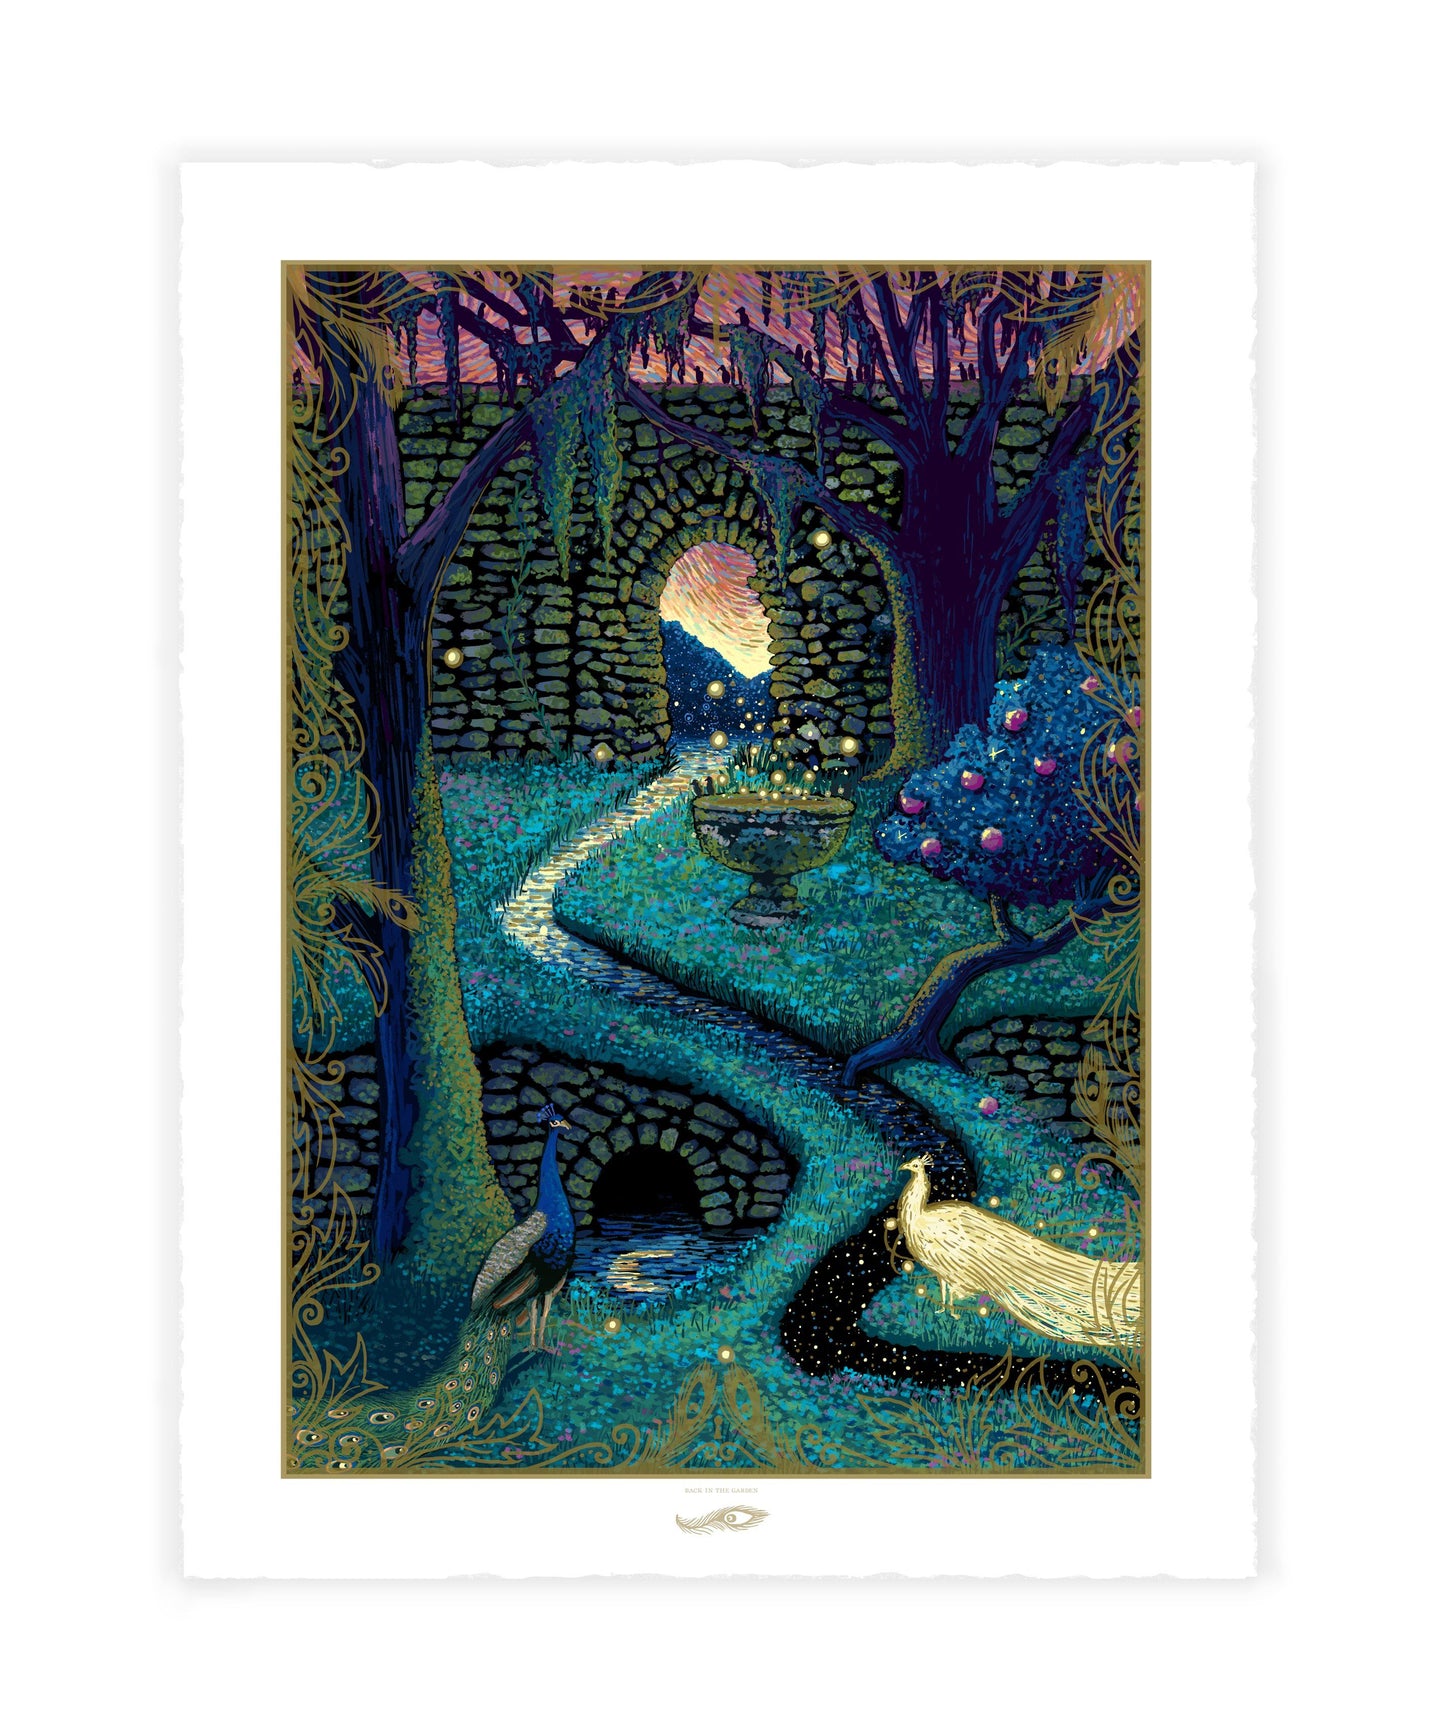 Back in the Garden (Limited Edition of 93) Print James R. Eads